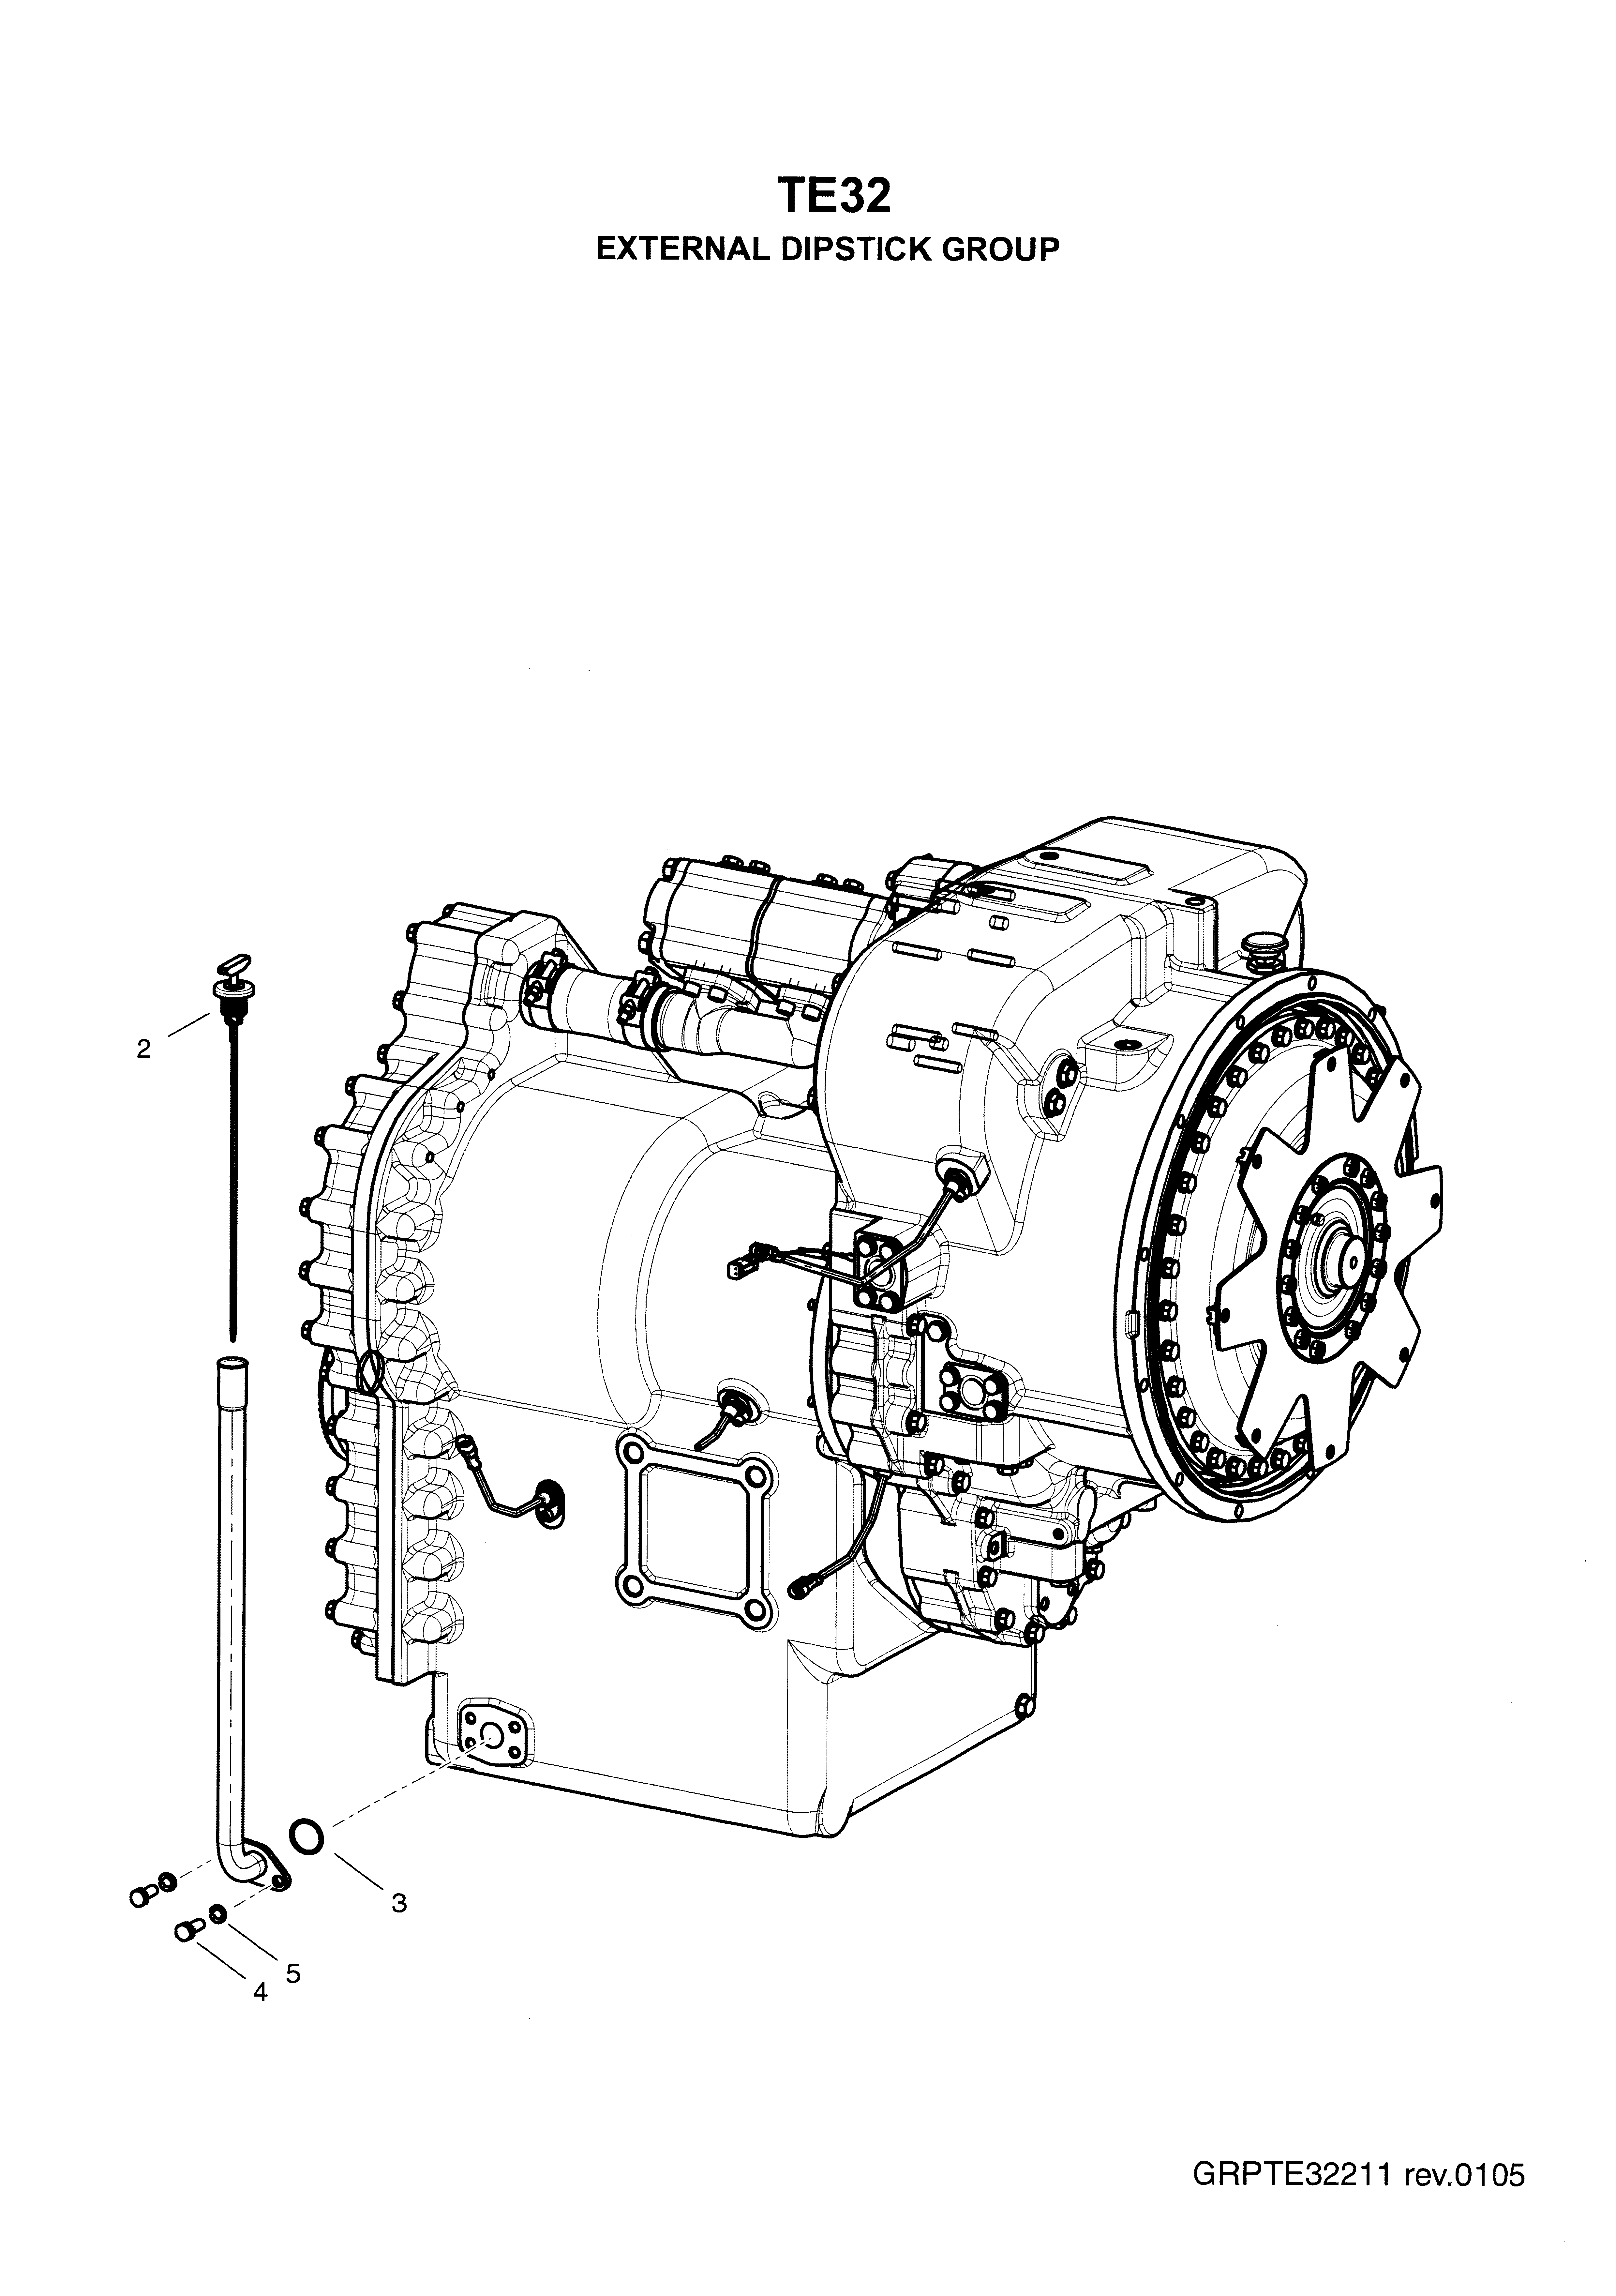 drawing for TELEDYNE SPECIALITY EQUIPMENT 1004235 - DIP STICK